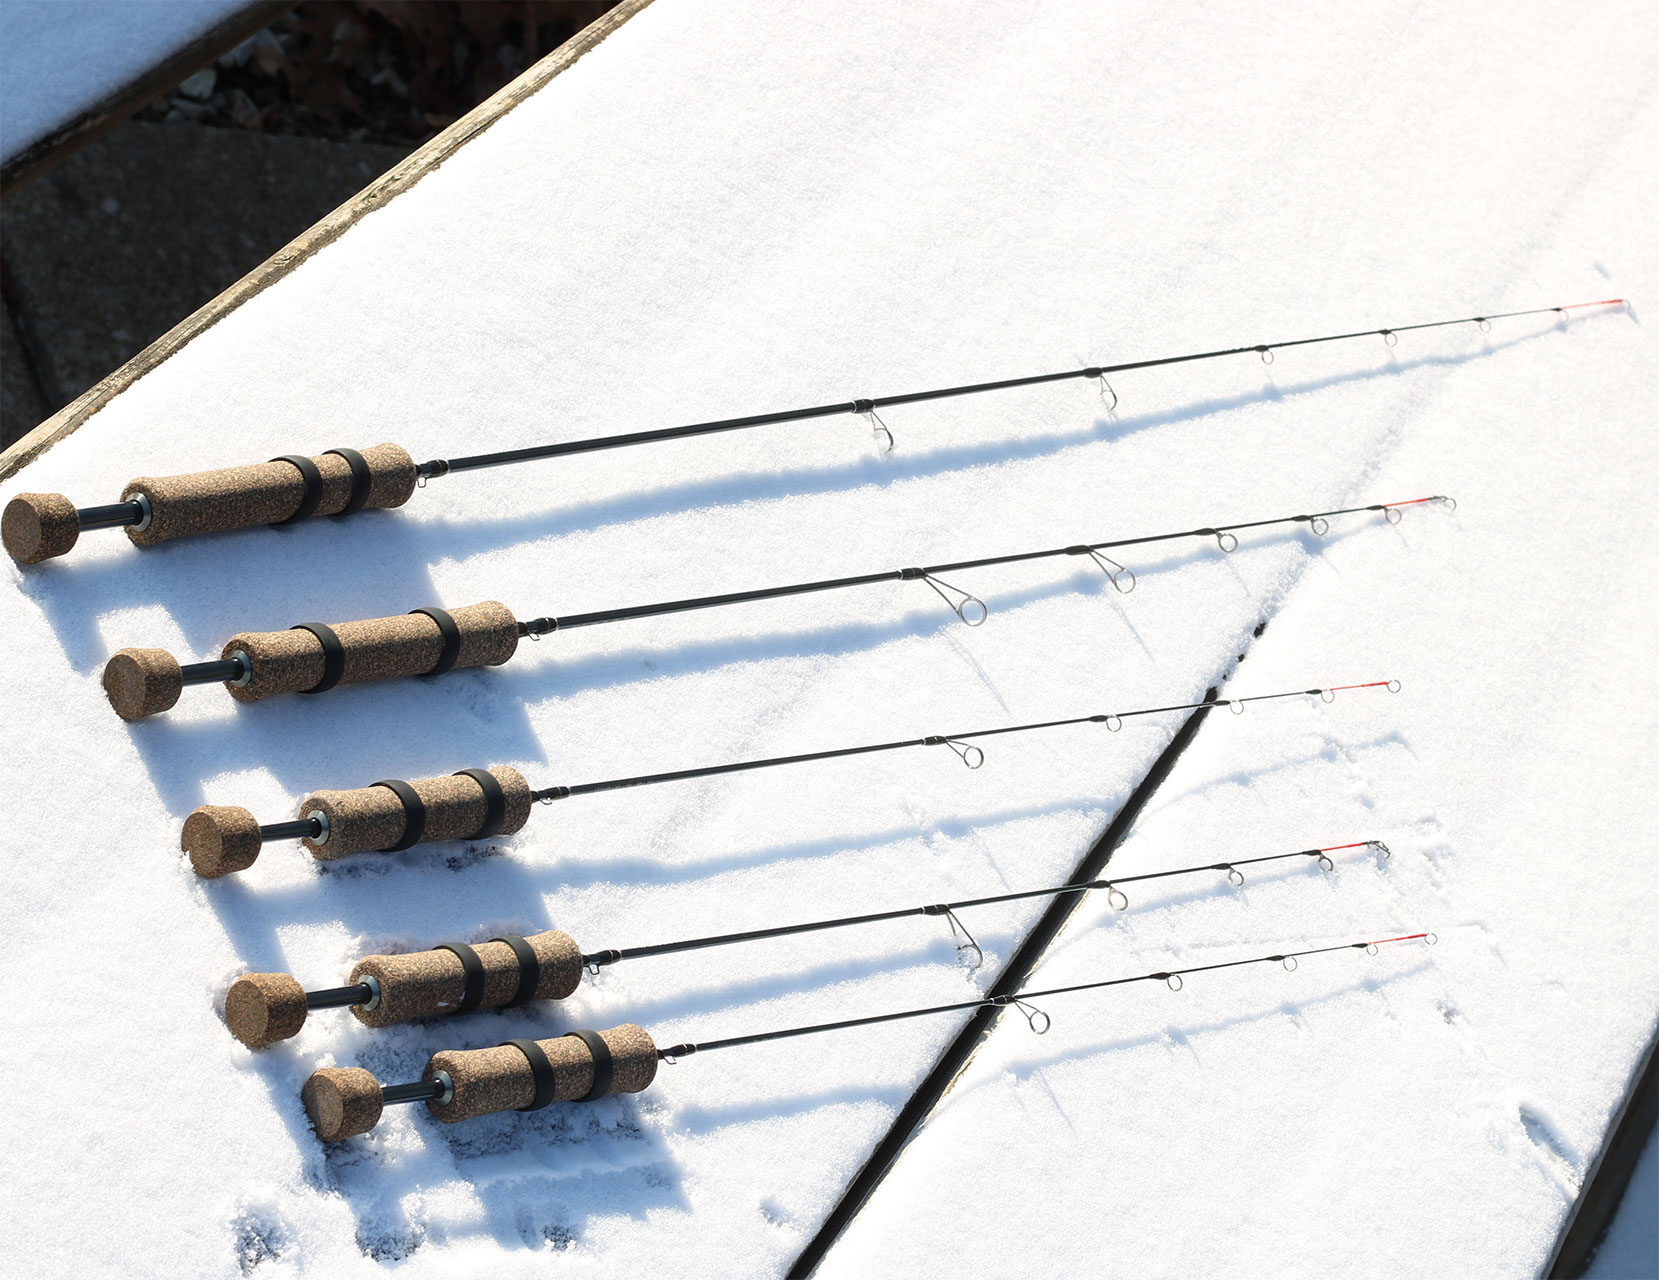 18 Well-tried Ice Fishing Items Rods, Reels, Tip-Ups –, 44% OFF